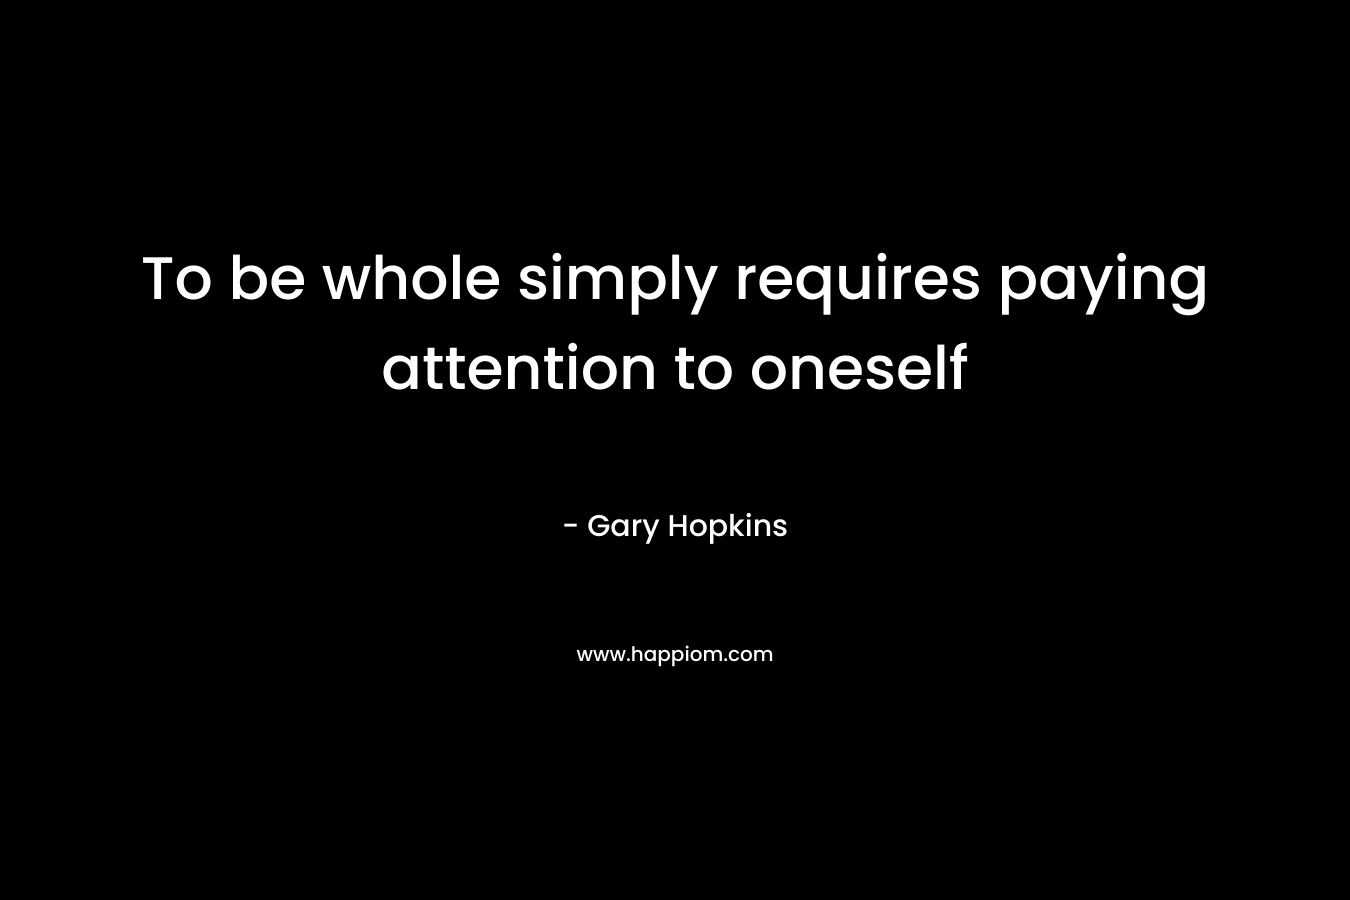 To be whole simply requires paying attention to oneself